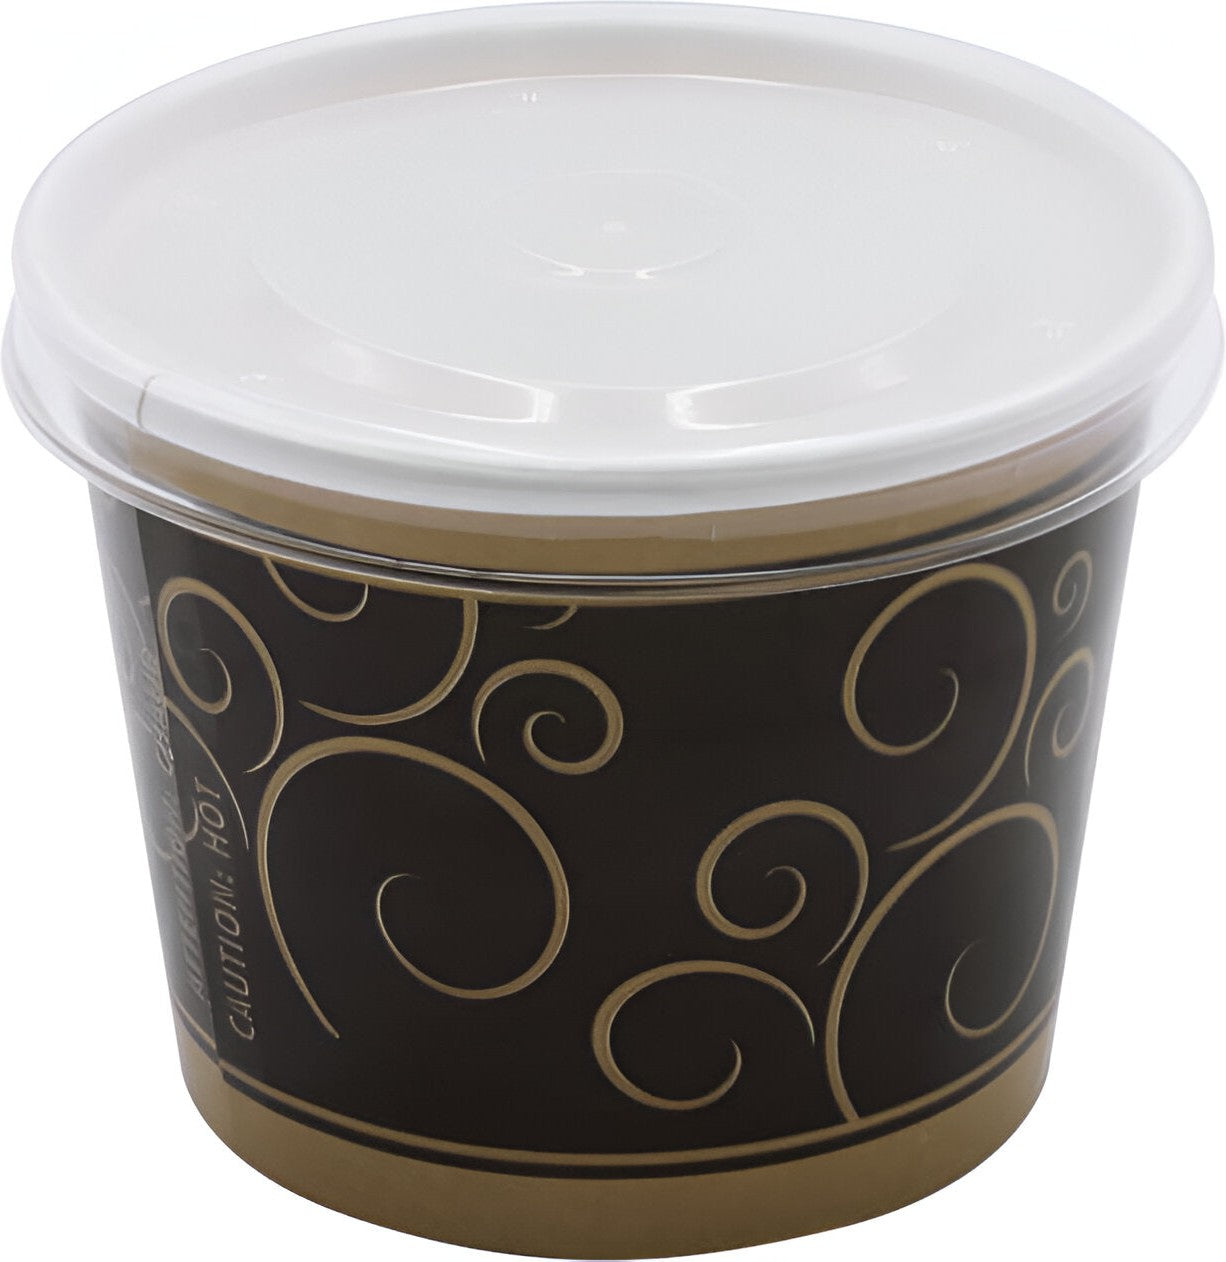 RiteWare - 12 Oz Aroma Design DSP Food Container with Lid, 500/cs - KH12AR